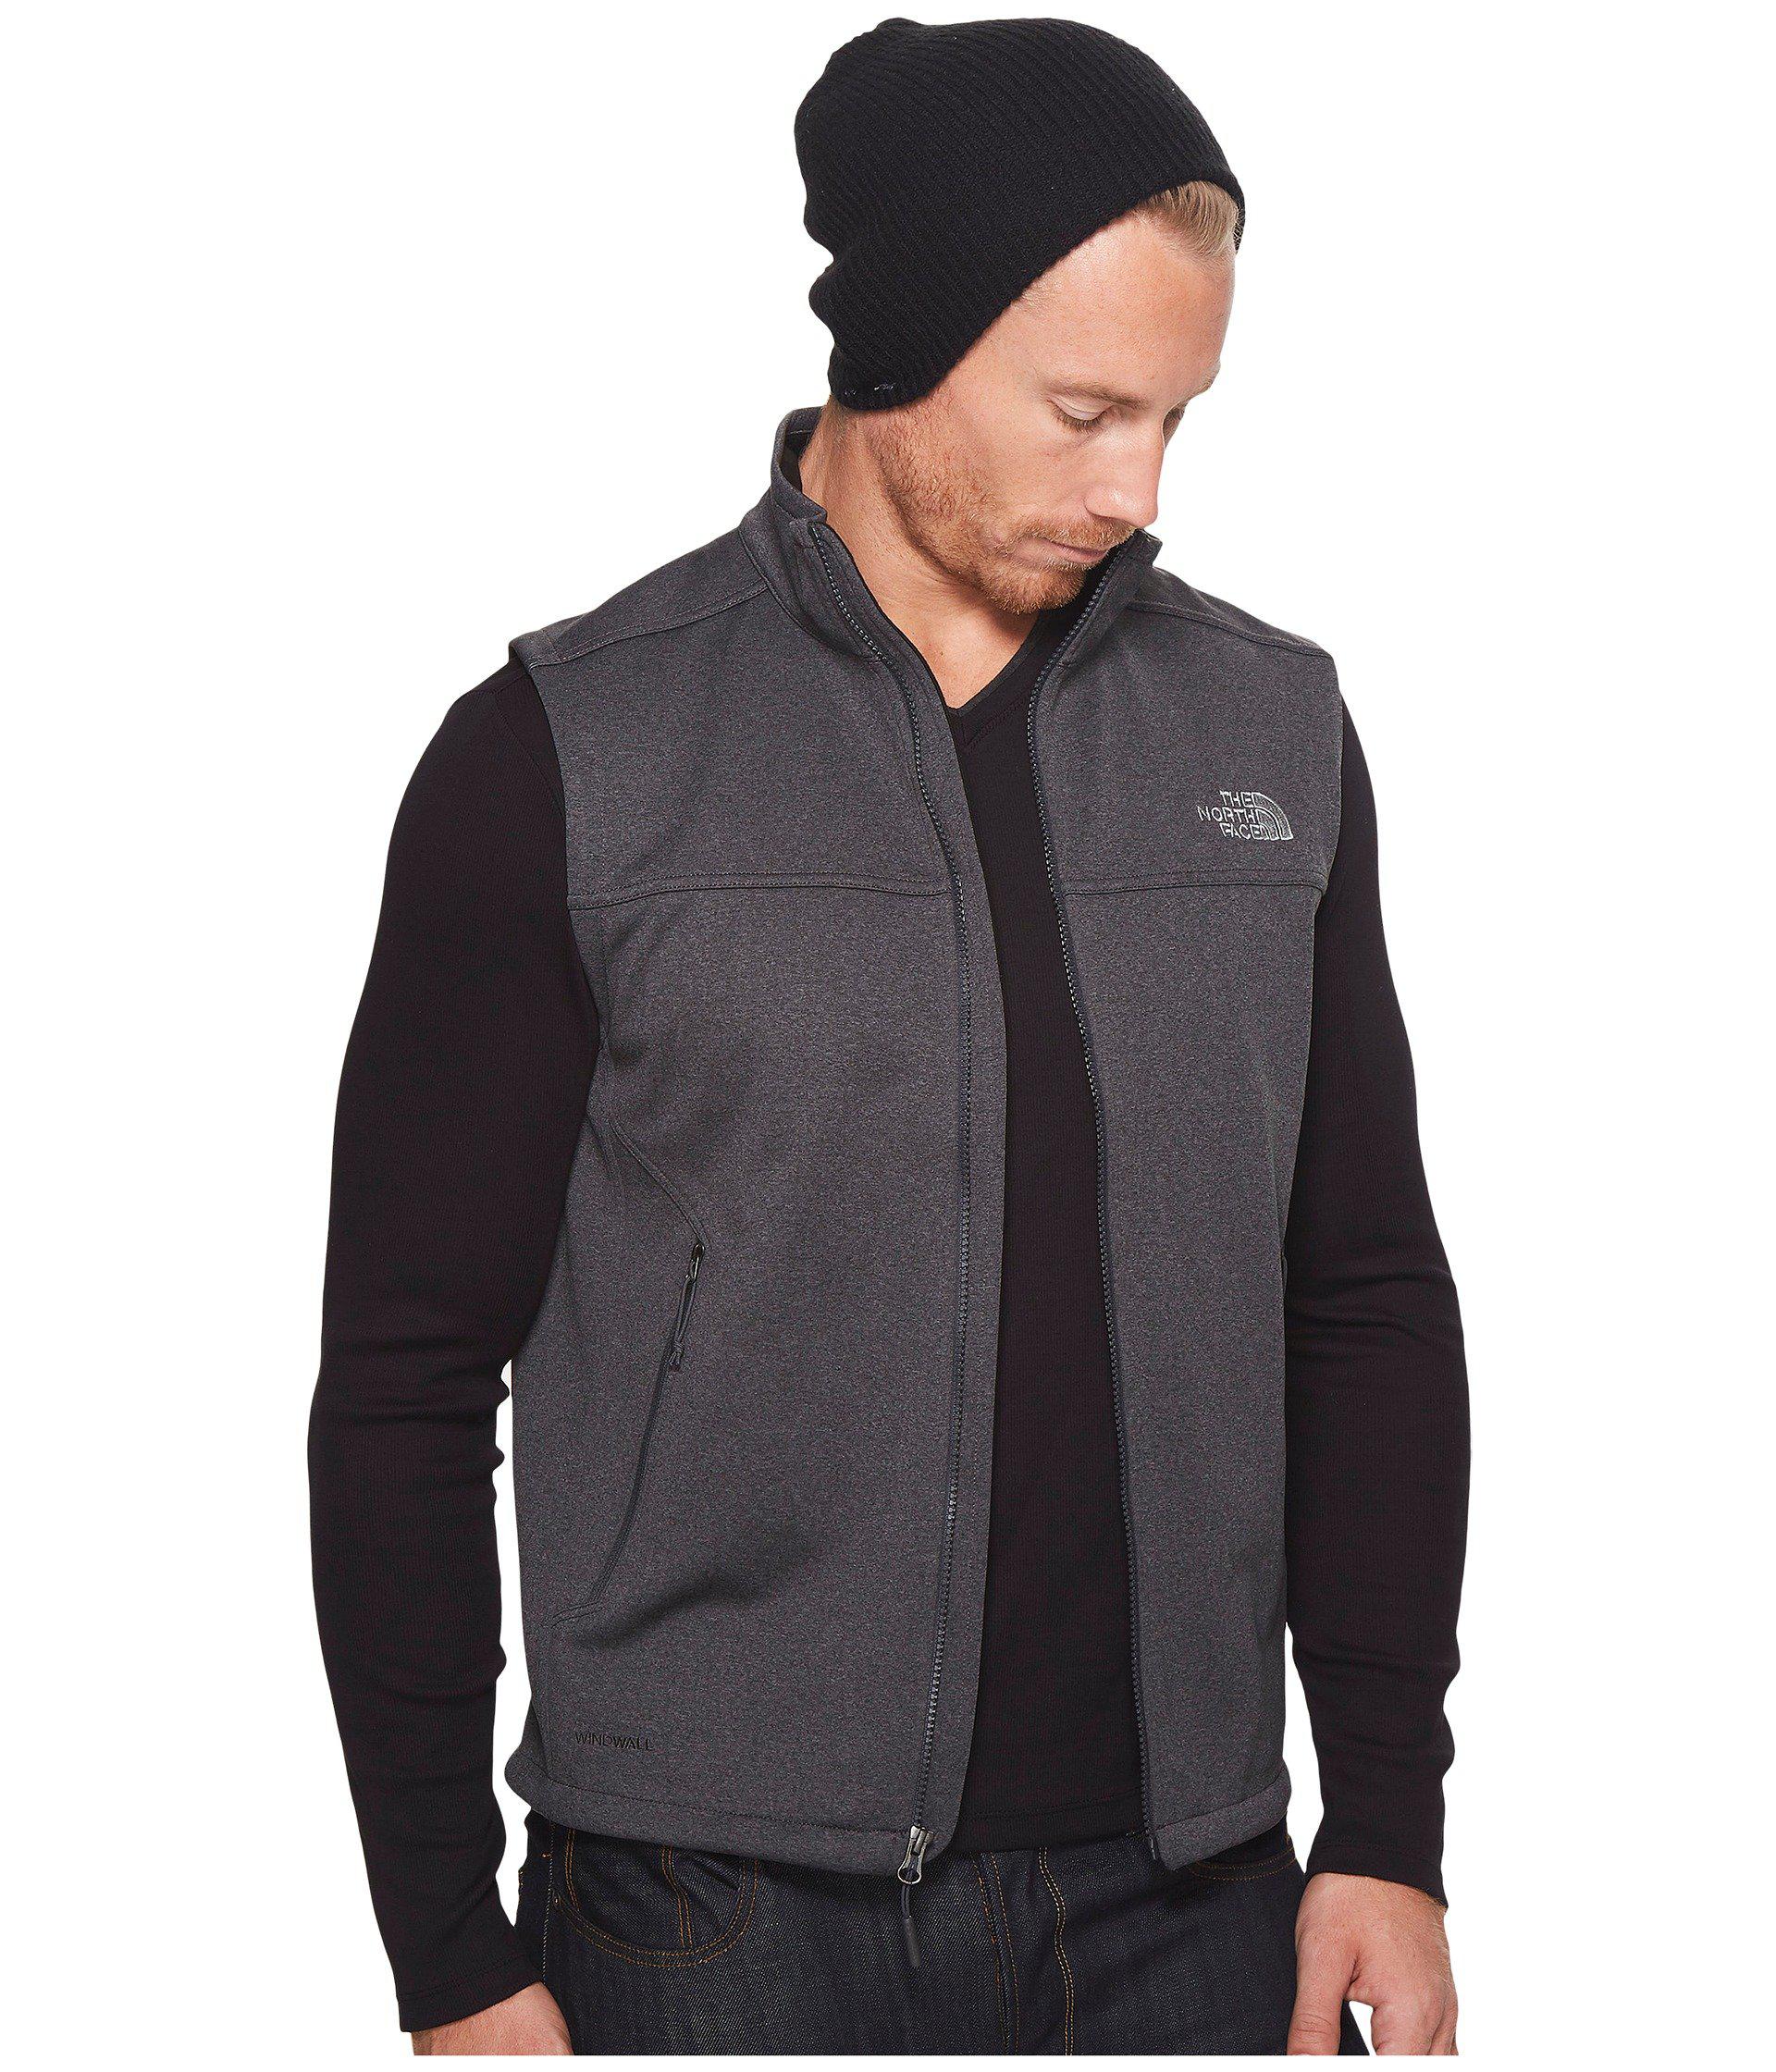 the north face apex canyonwall vest